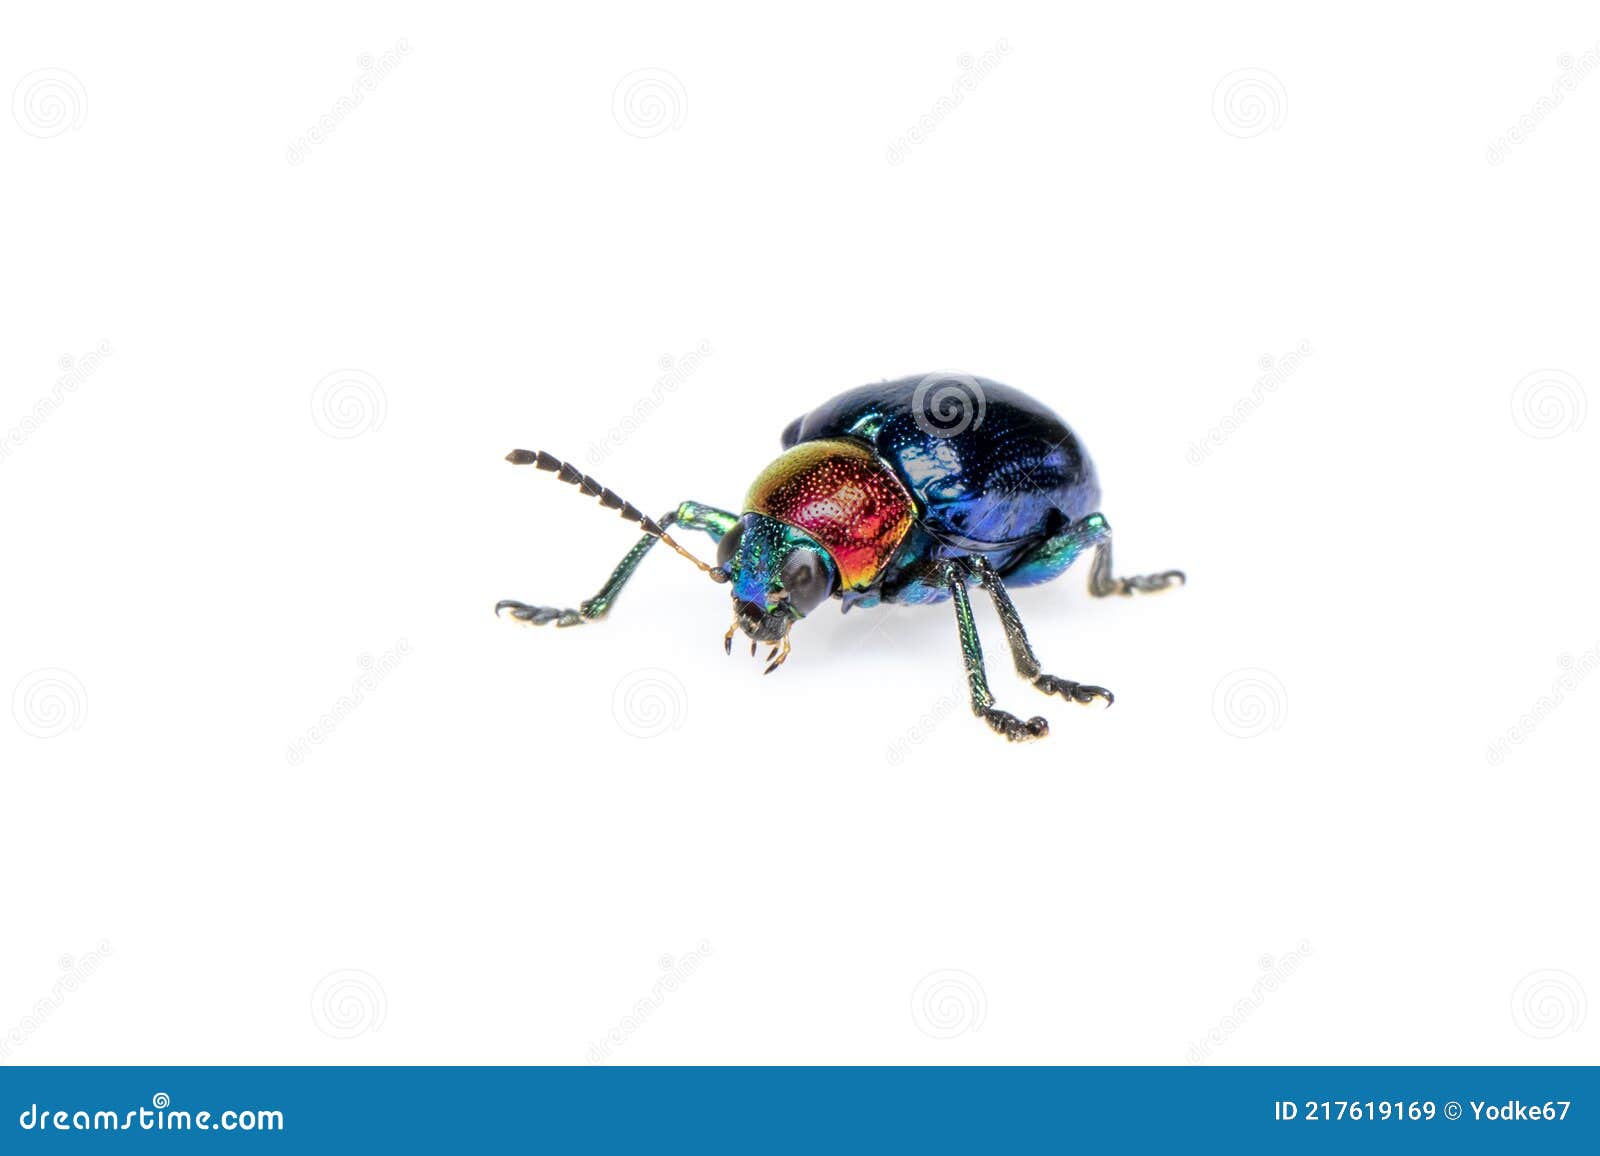 Image Of Blue Milkweed Beetle It Has Blue Wings And A Red Head Isolated On White Background